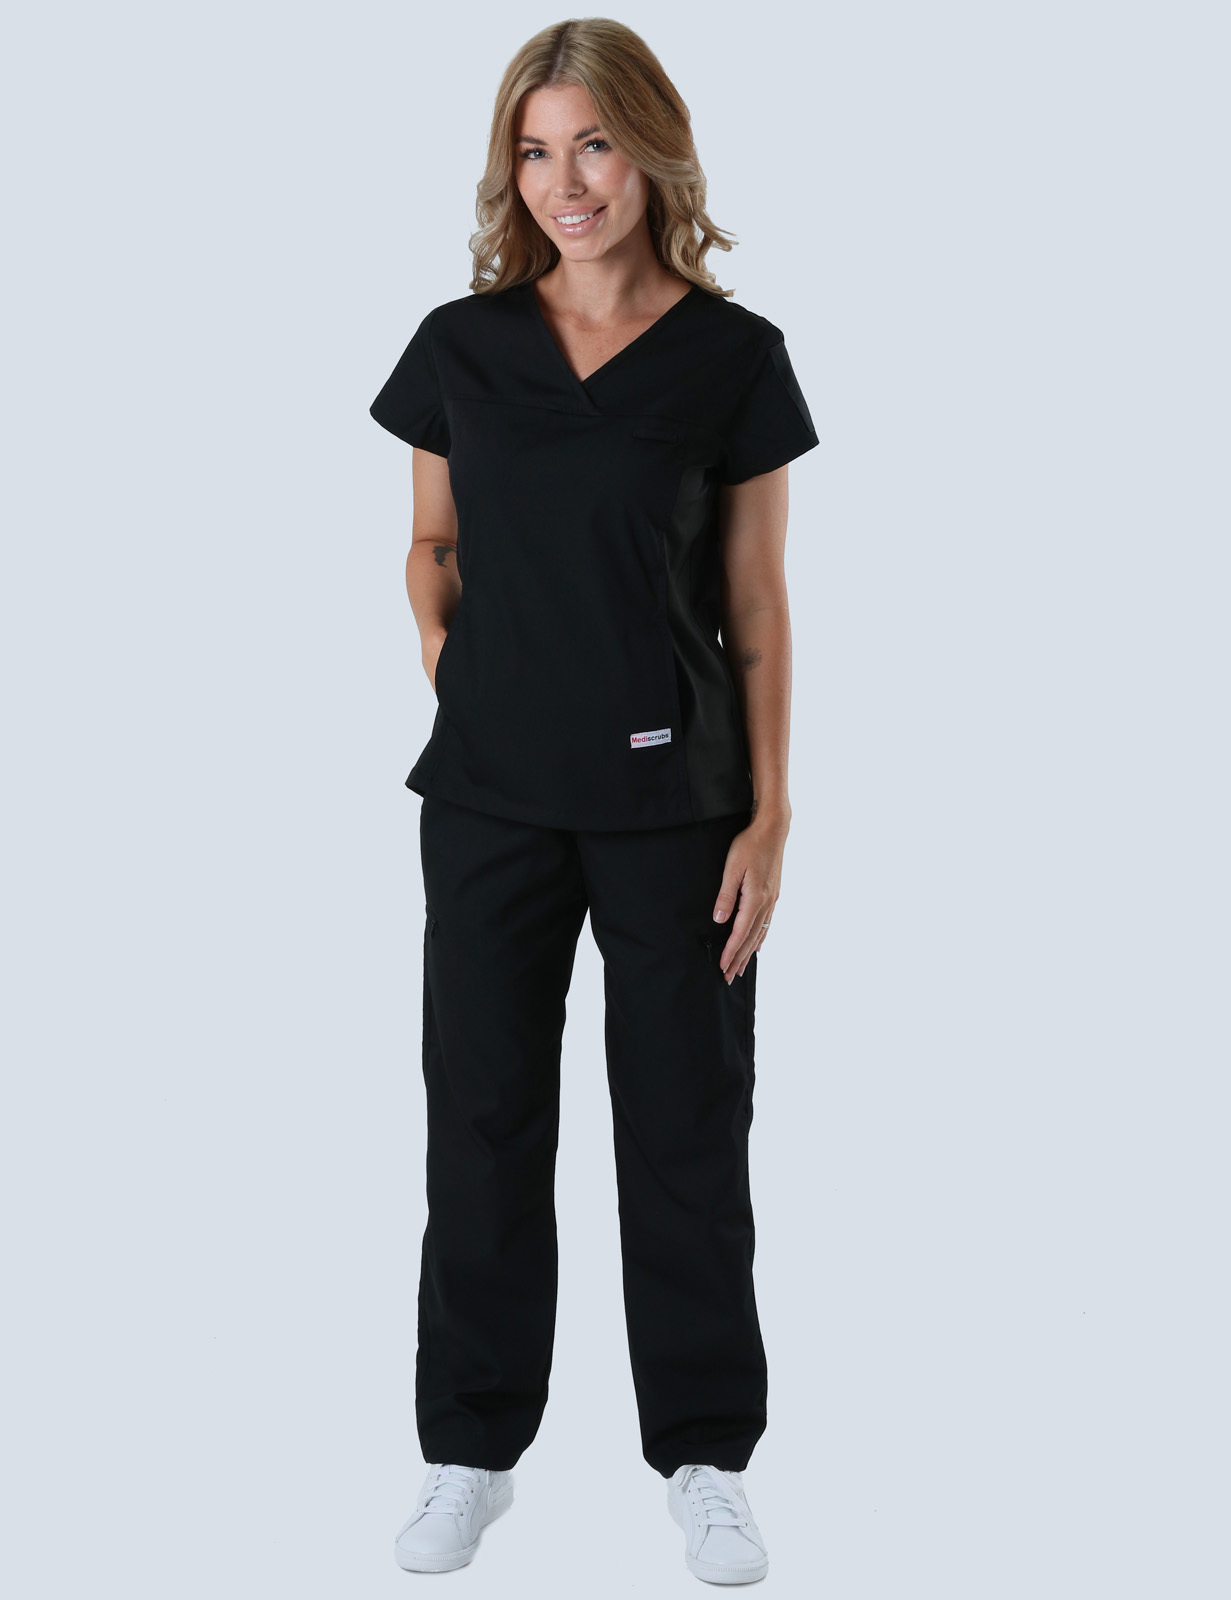 Women's Fit Solid Scrub Top With Spandex Panel - Black - 5X Large